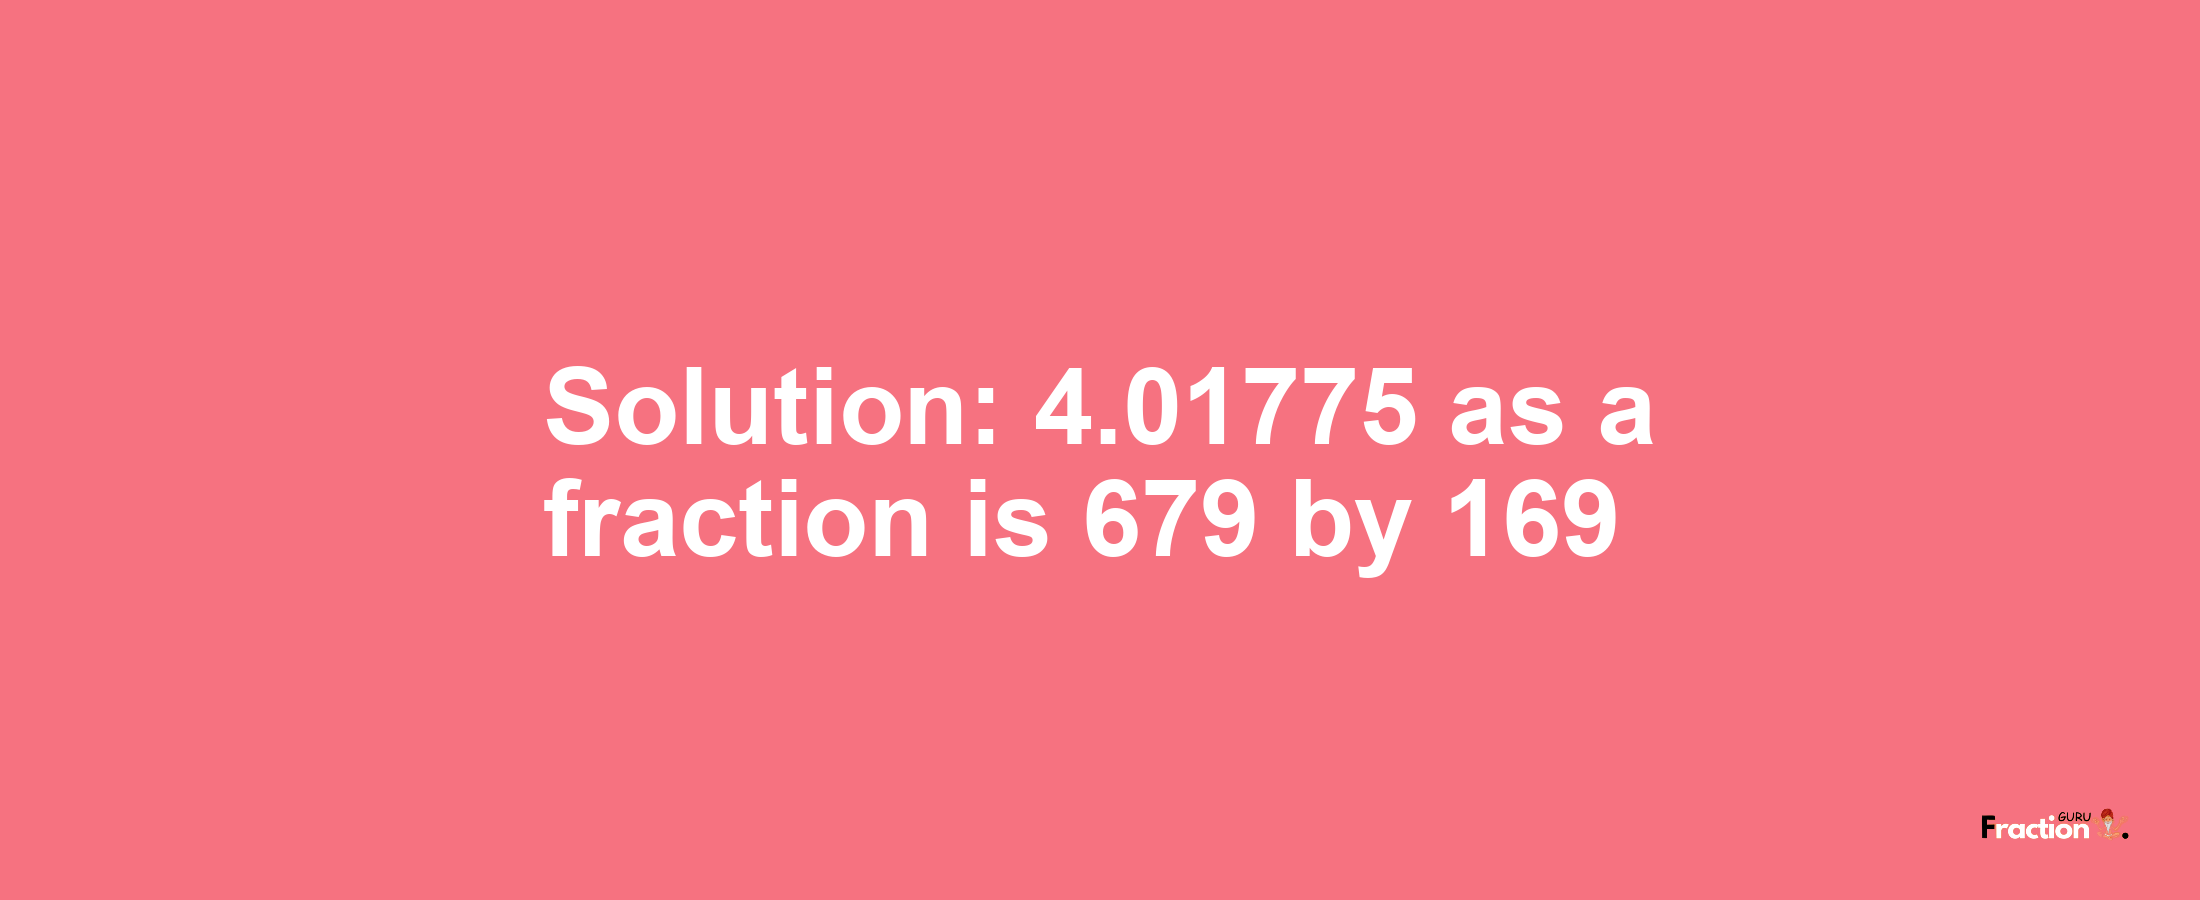 Solution:4.01775 as a fraction is 679/169